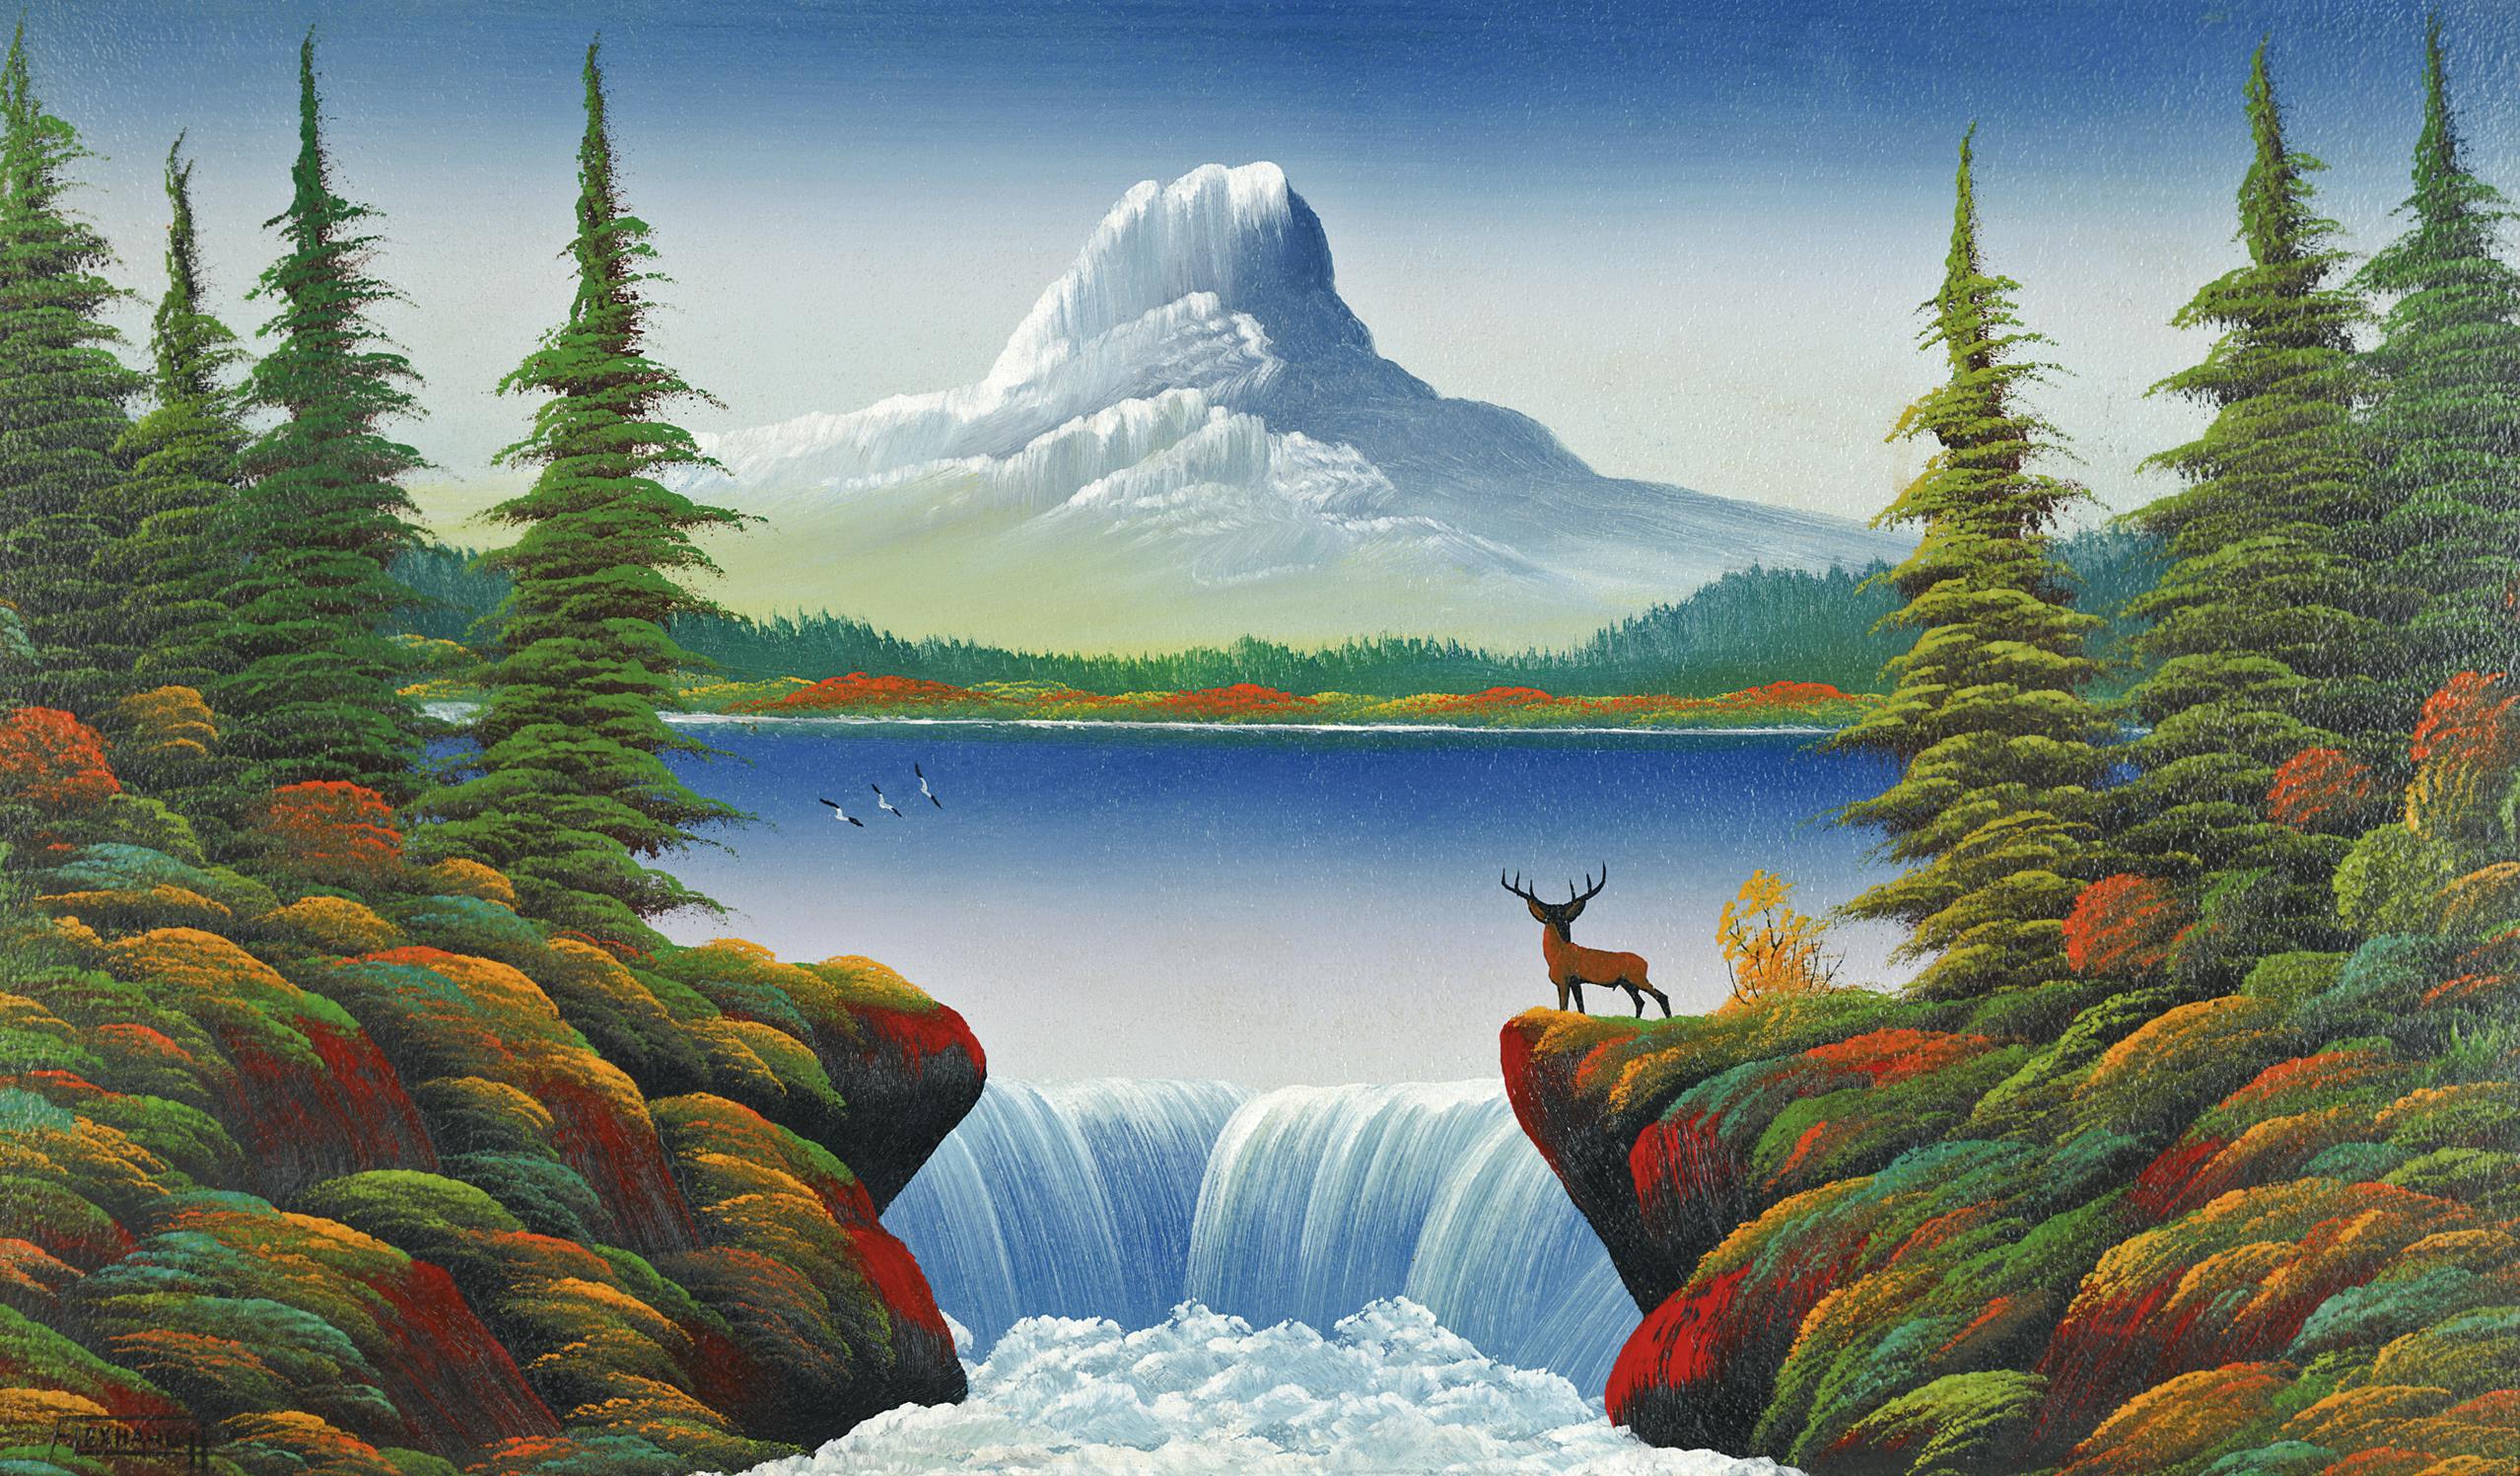 A landscape painting depicting a lake and a waterfall framed by pine trees. There is a mountain in the background and a deer standing on colorful rocks to the right.